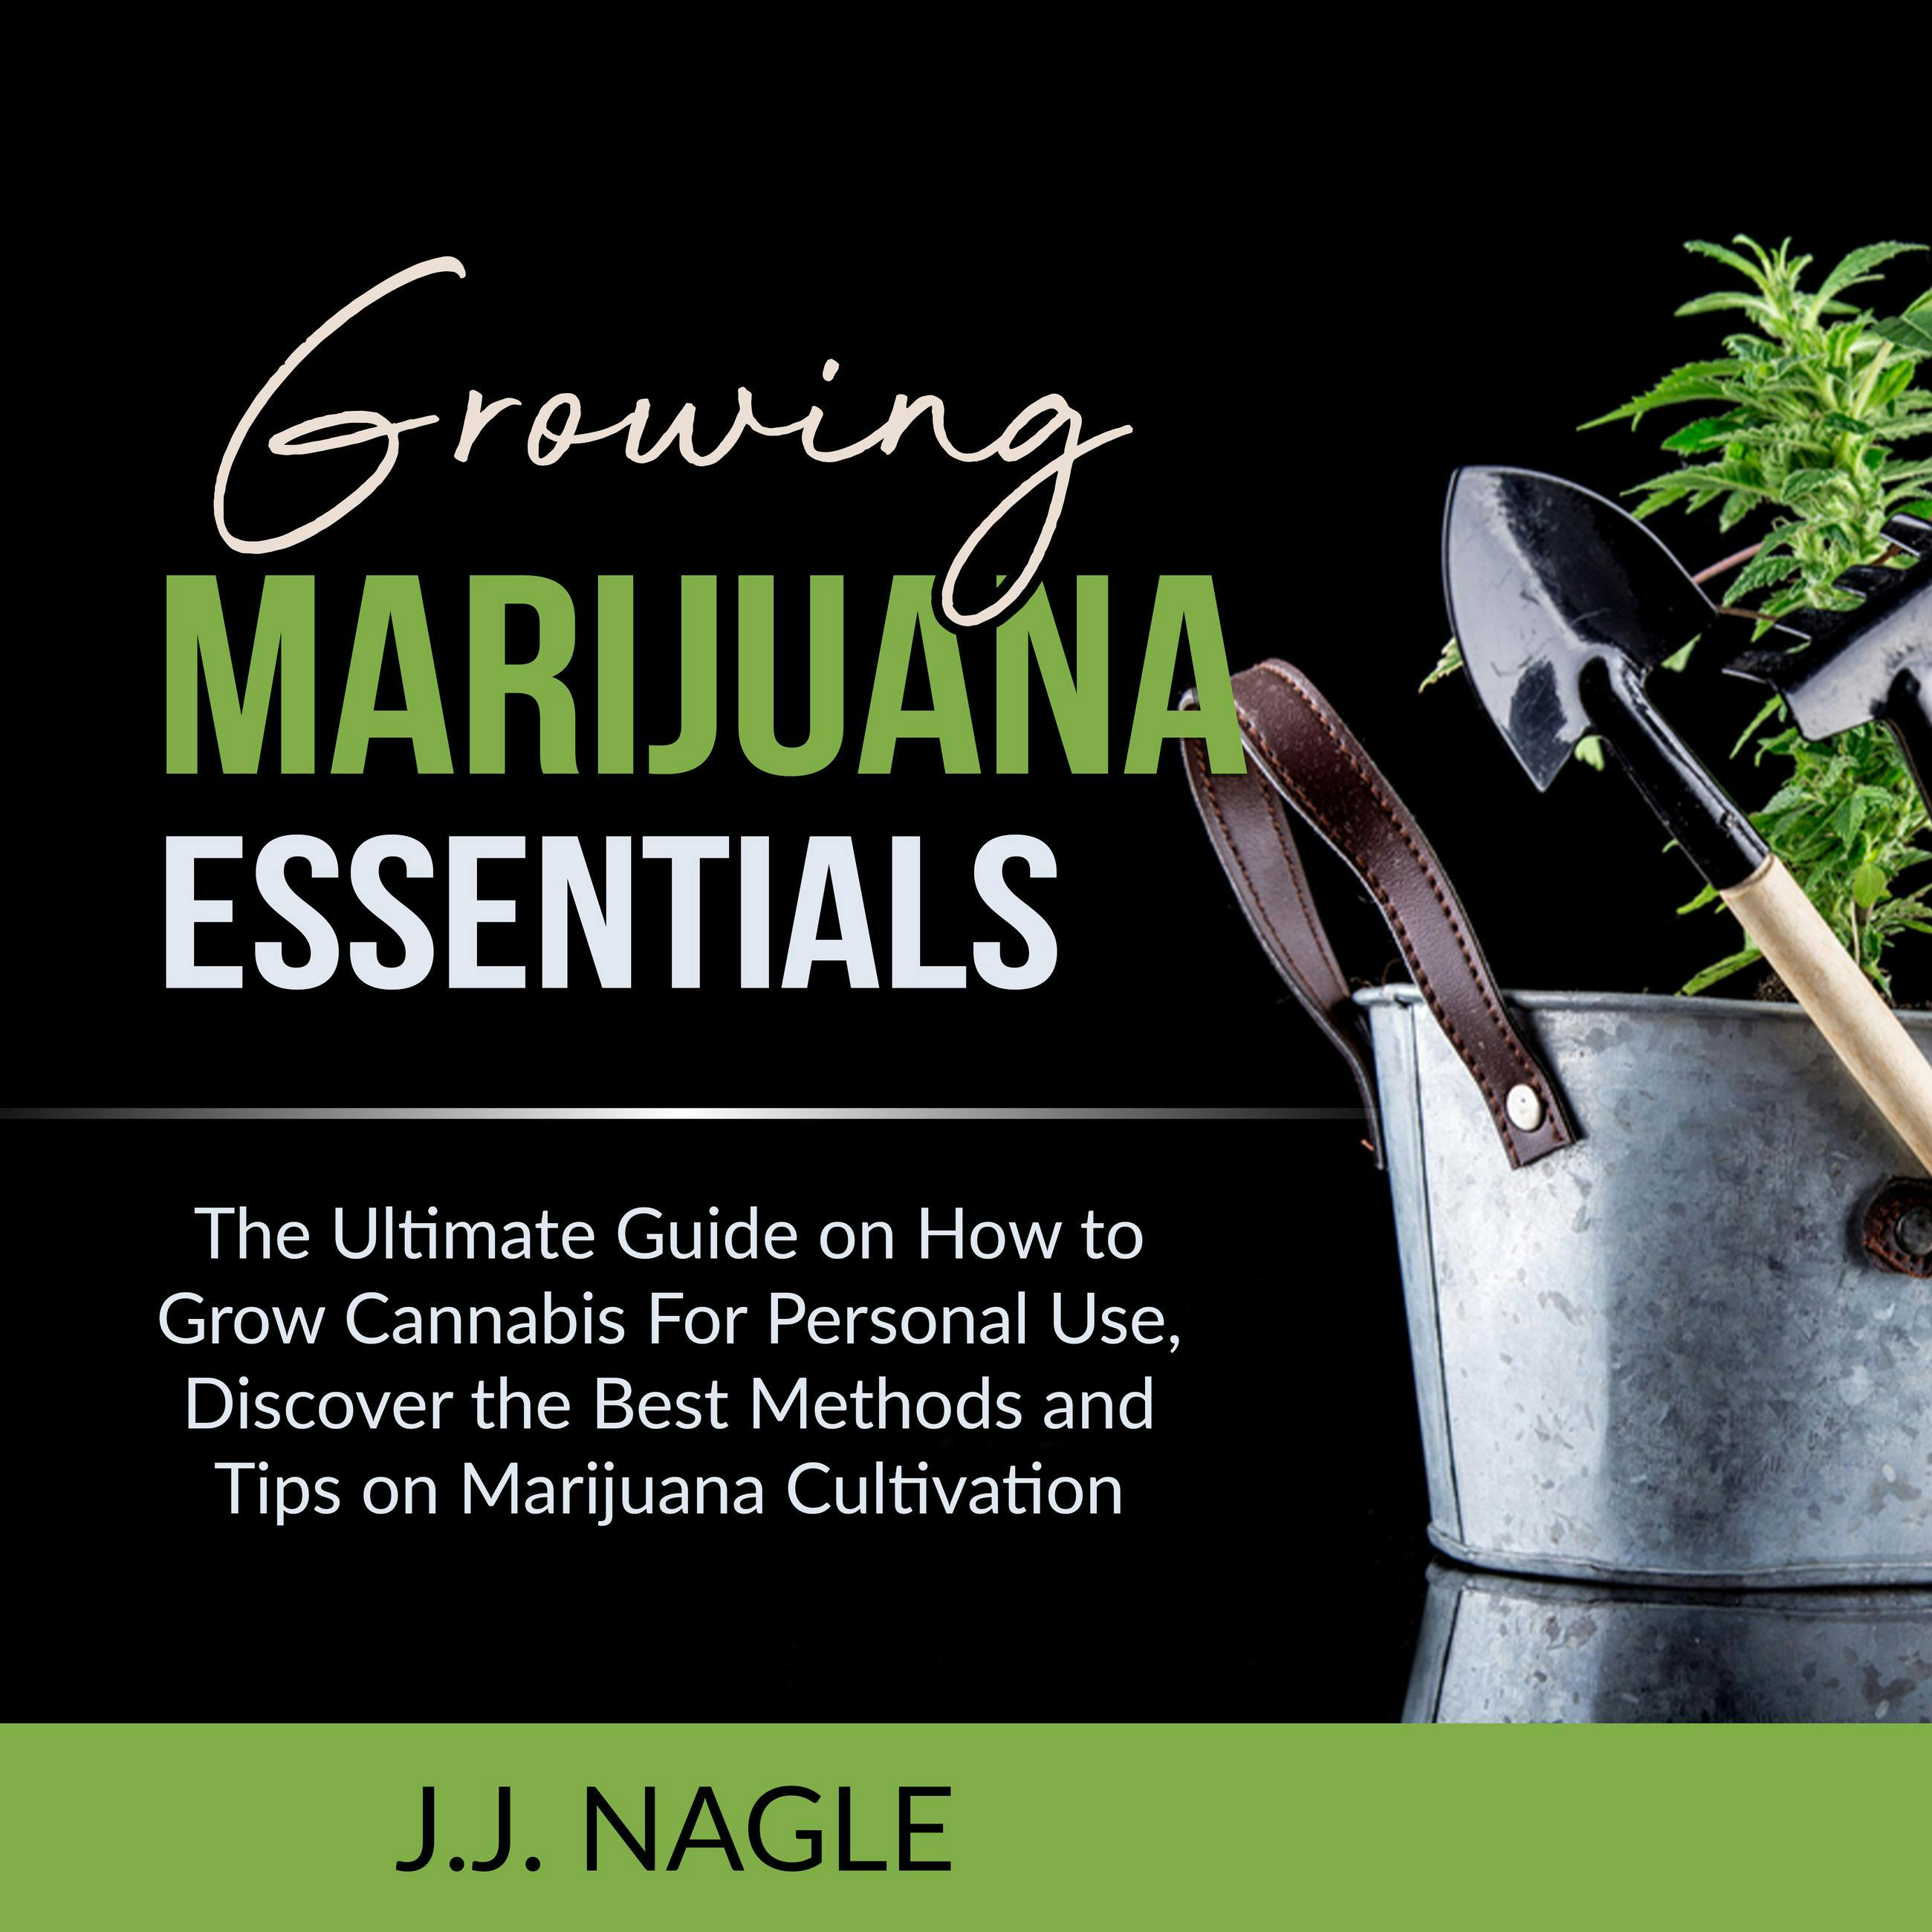 Growing Marijuana Essentials: The Ultimate Guide on How to Grow Cannabis For Personal Use, Discover the Best Methods and Tips on Marijuana Cultivation - J.J. Nagle